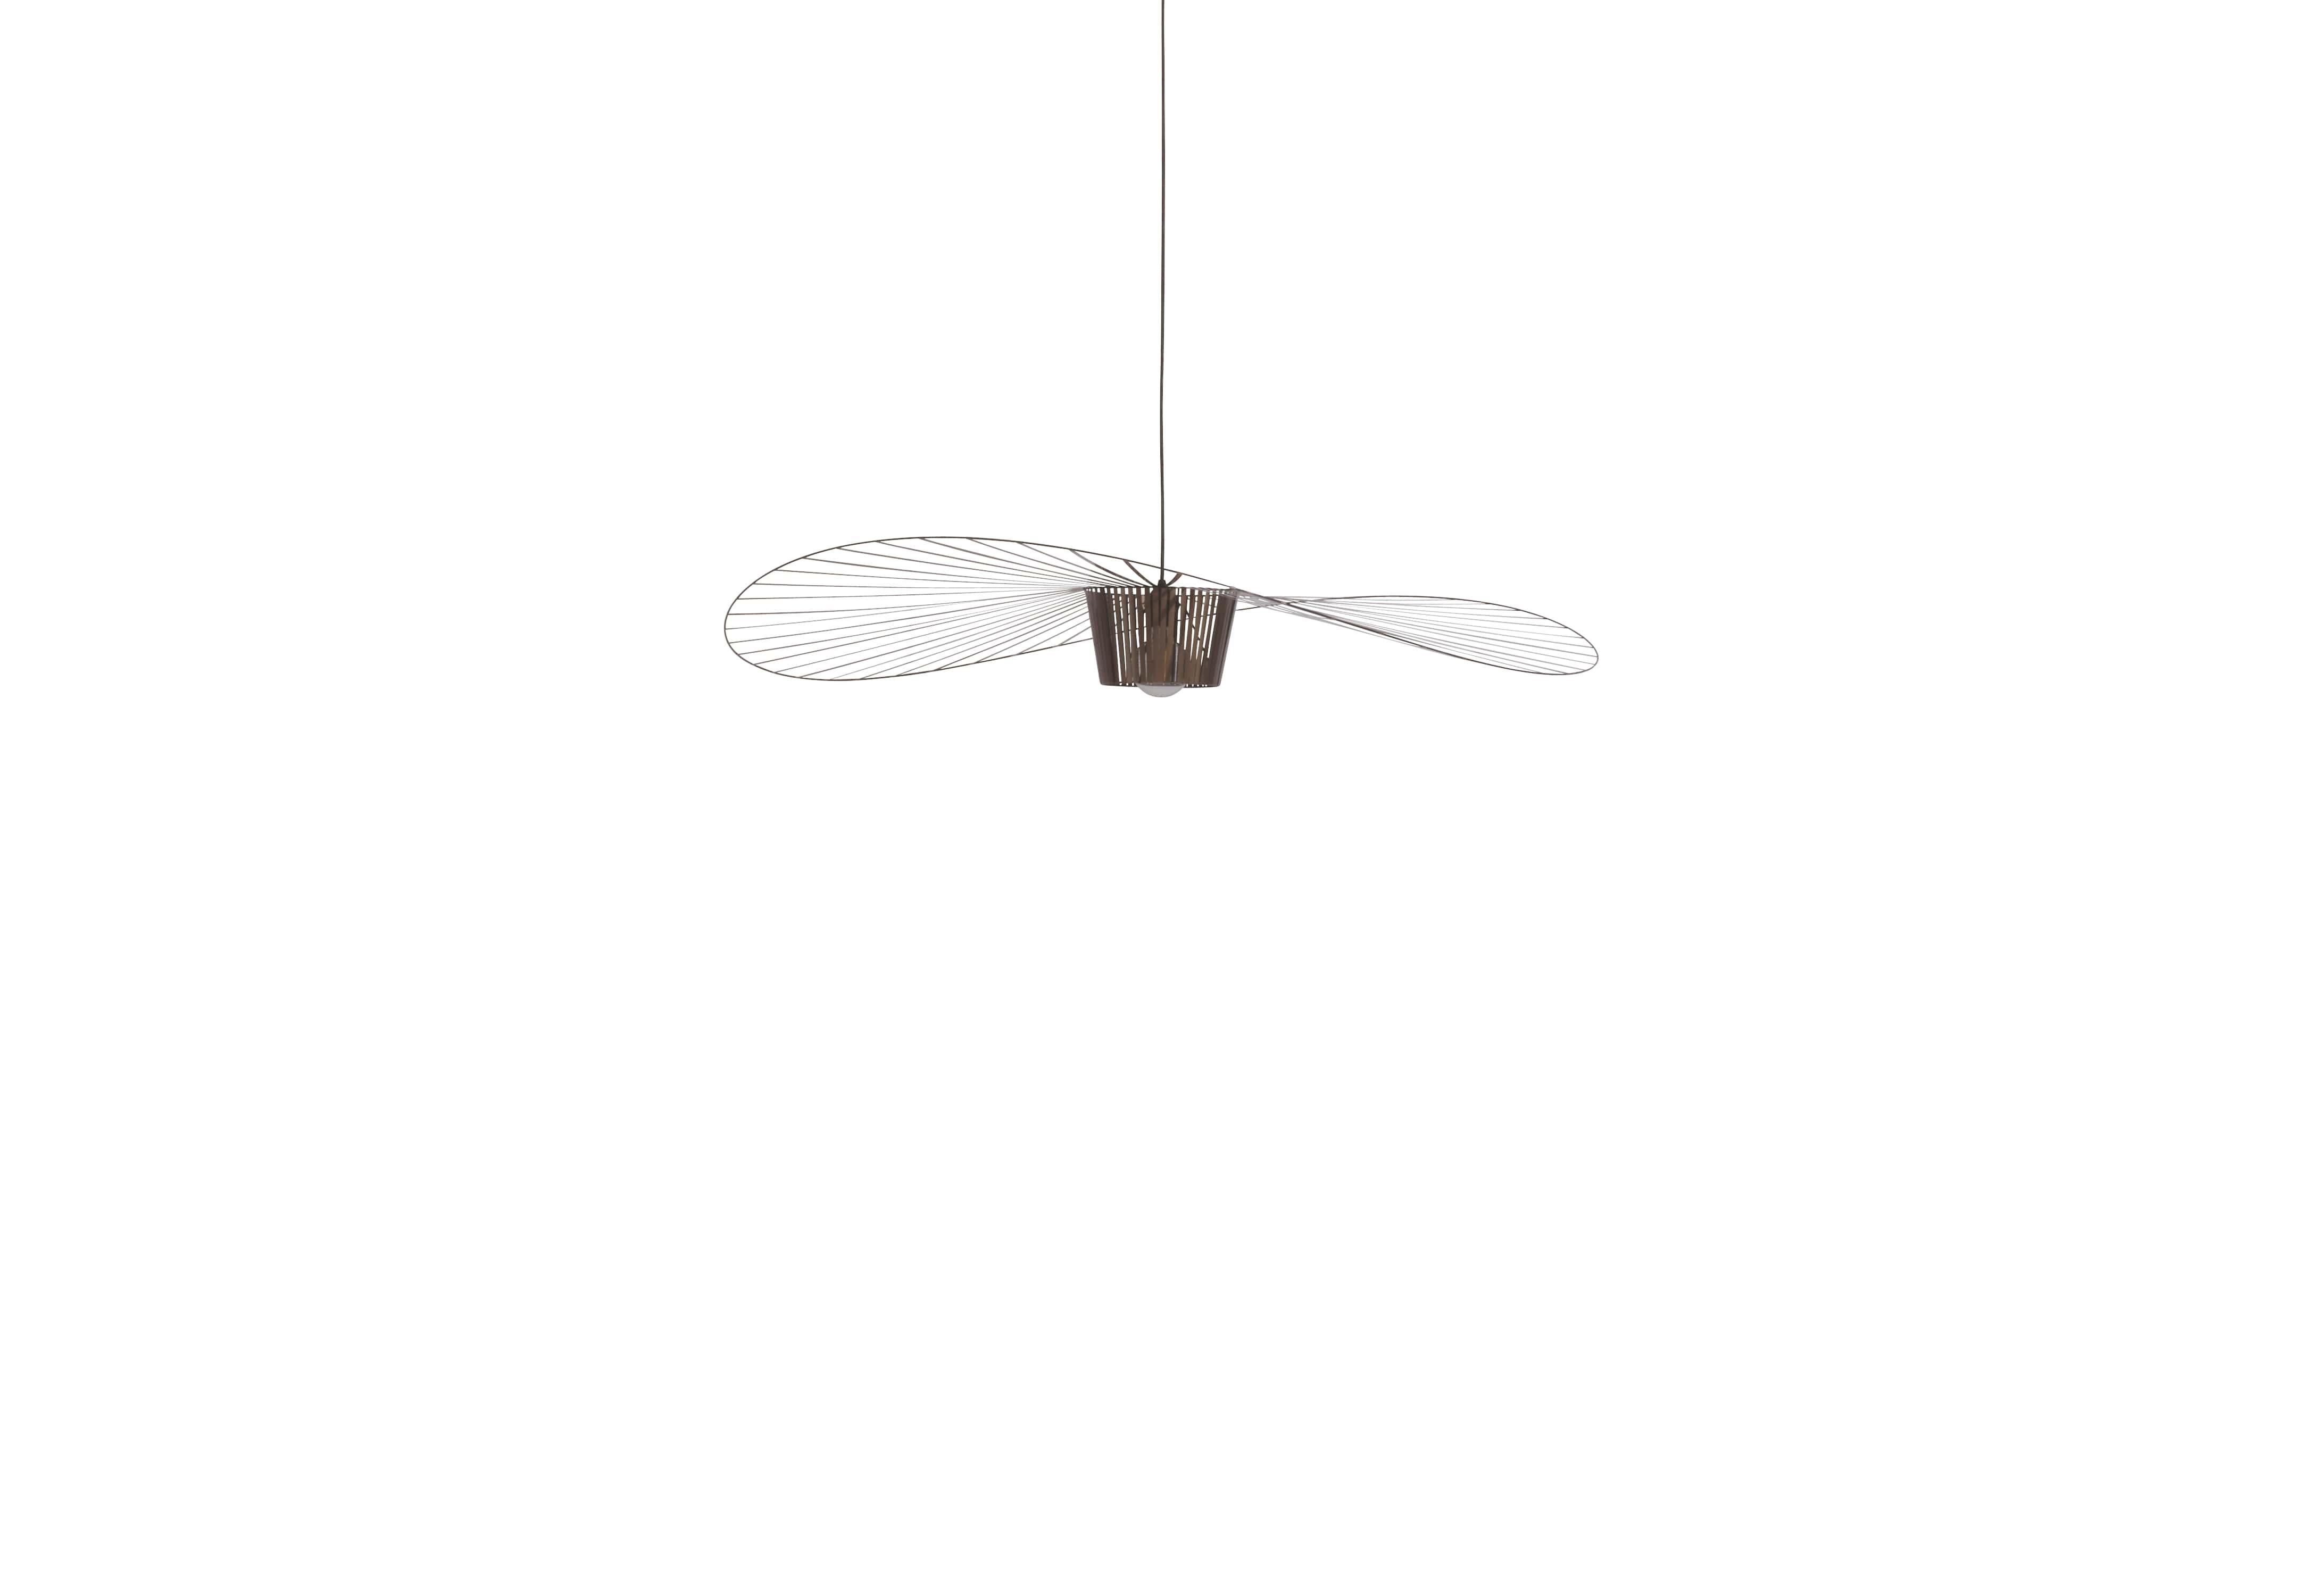 Petite Friture Medium Vertigo Pendant Light in Bronze by Constance Guisset, 2010

Edited by Petite Friture in 2010, the Vertigo pendant light is now an icon of contemporary design. With its ultra-light fiberglass structure, stretched with velvety